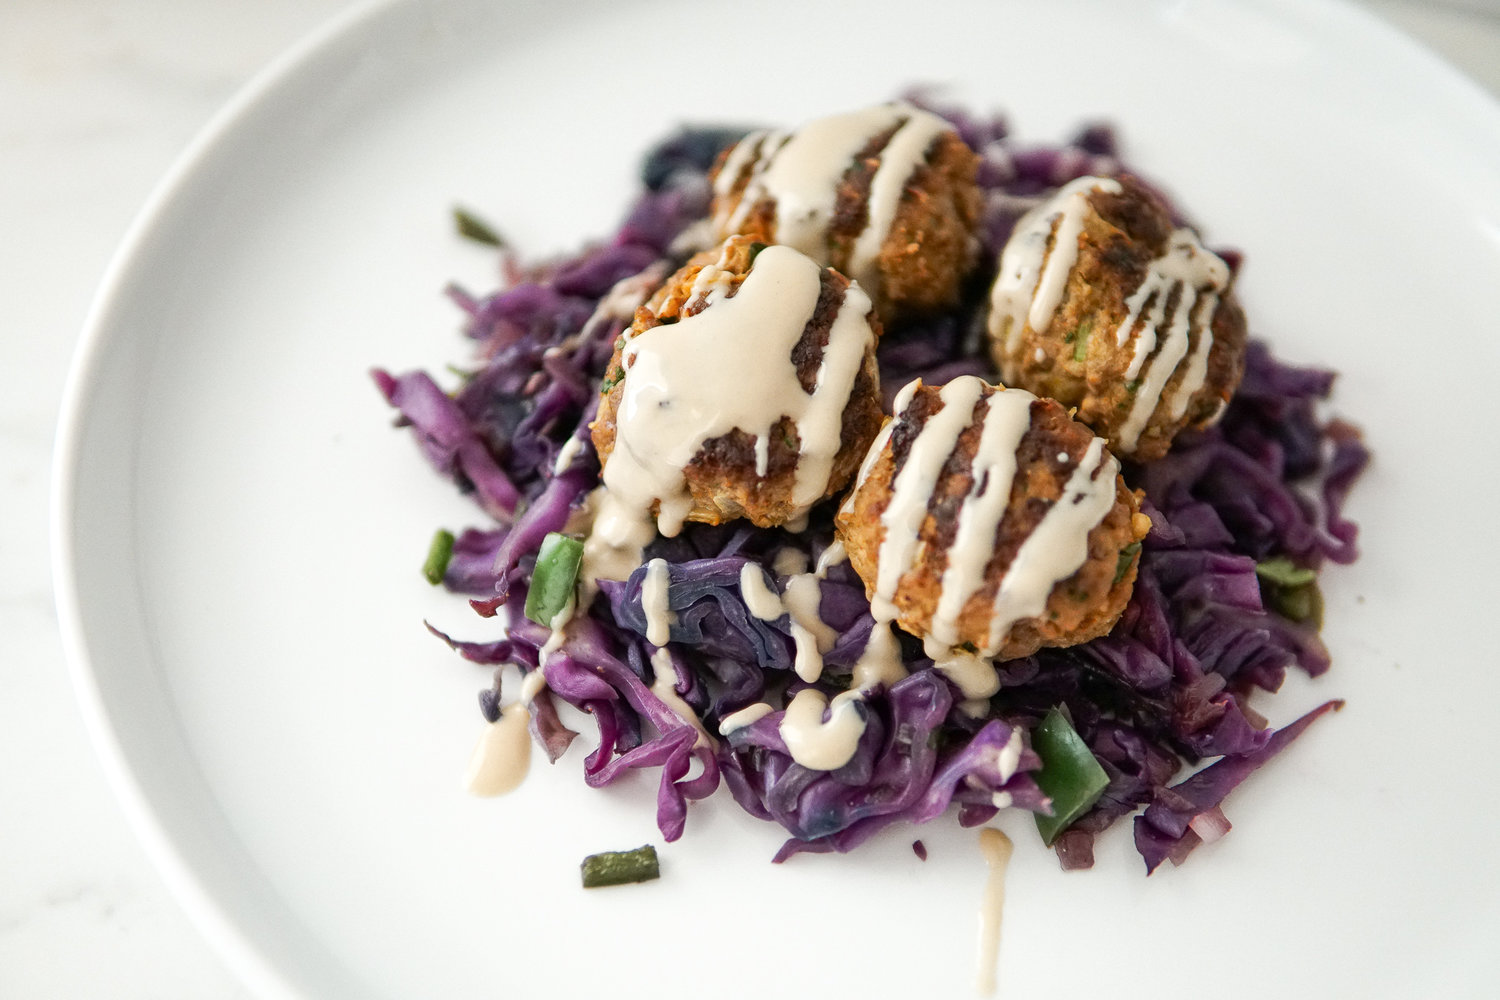 Moroccan spiced meatballs drizzled with tahini